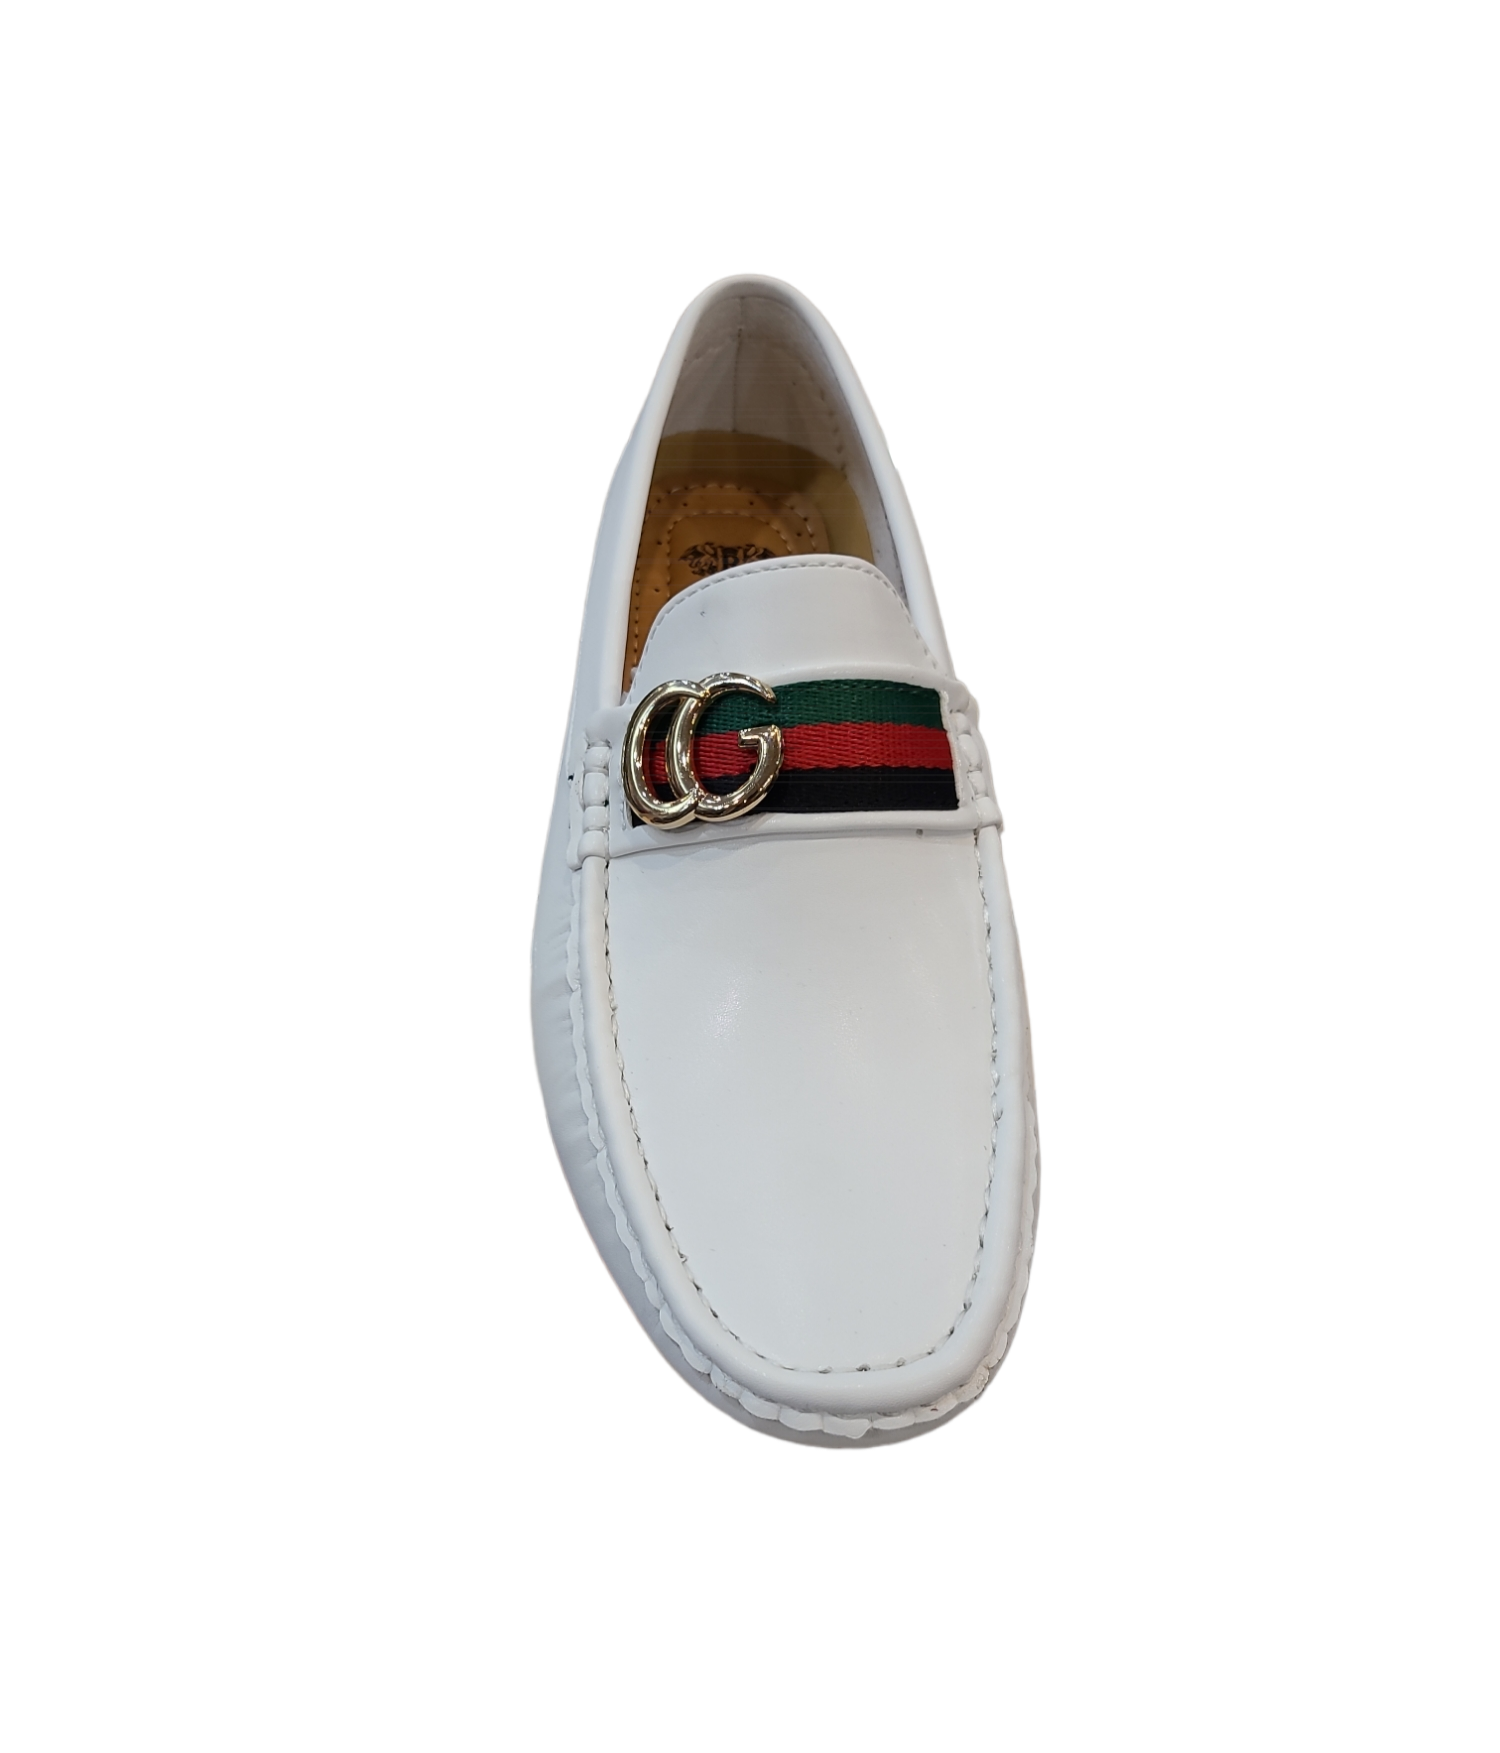 Royal Slip On Shoes with Buckle